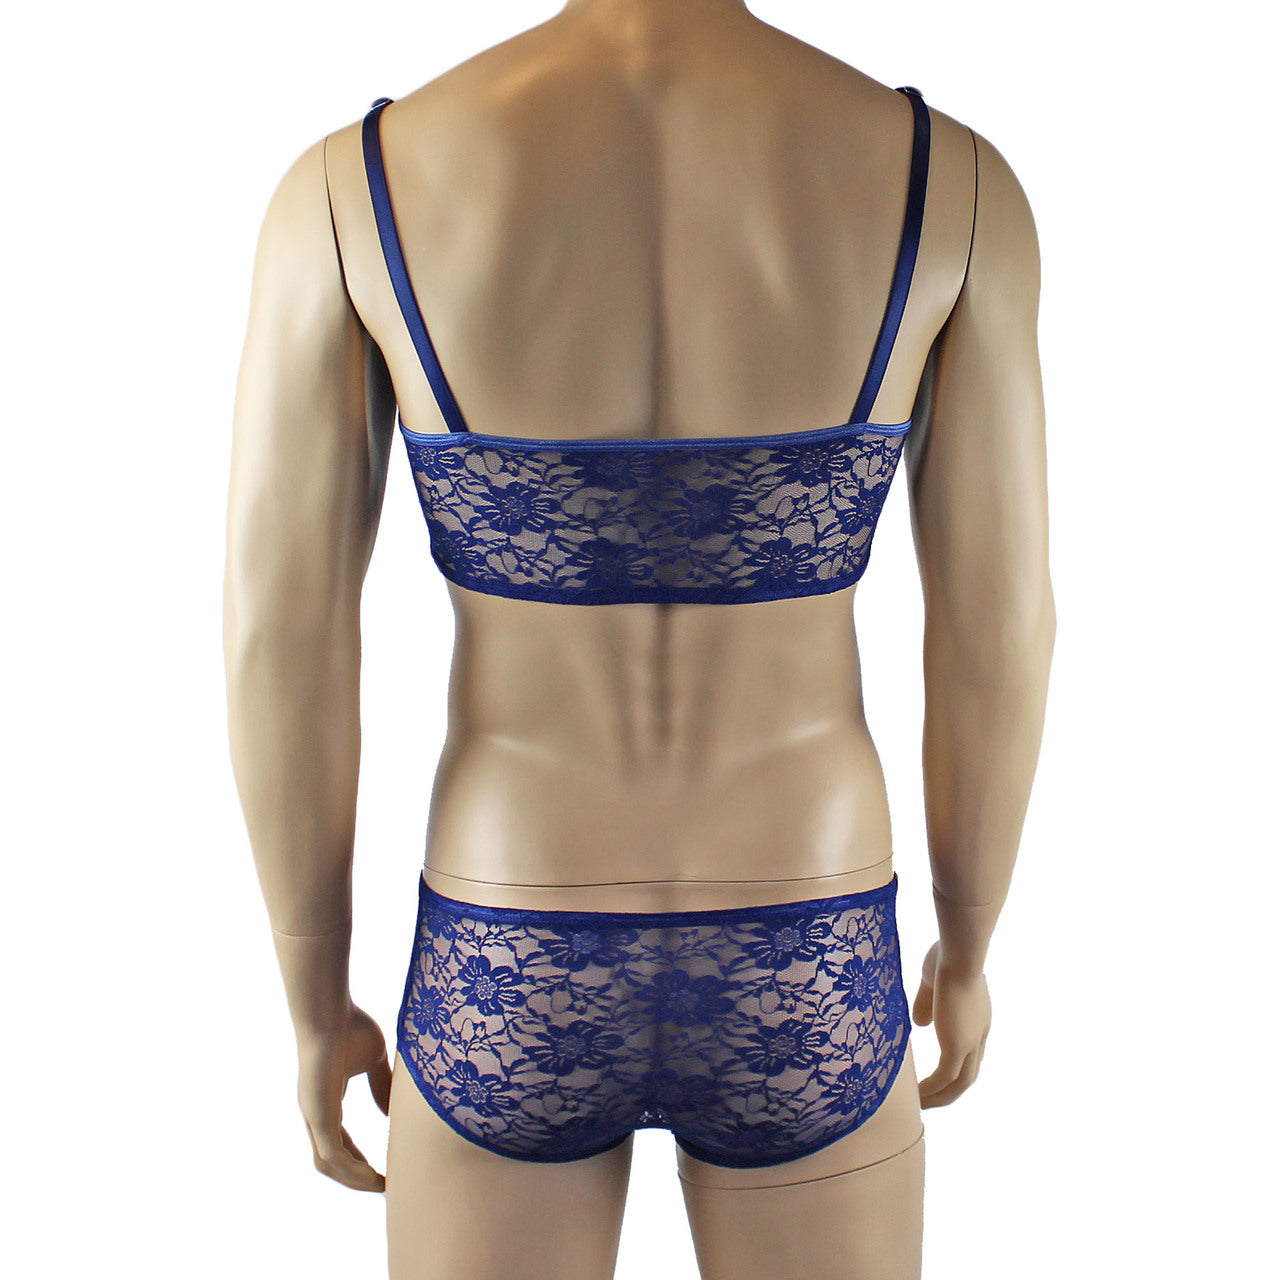 Mens Lace Crop Bra Top Camisole and Male Lingerie Panty Briefs (navy plus other colours)